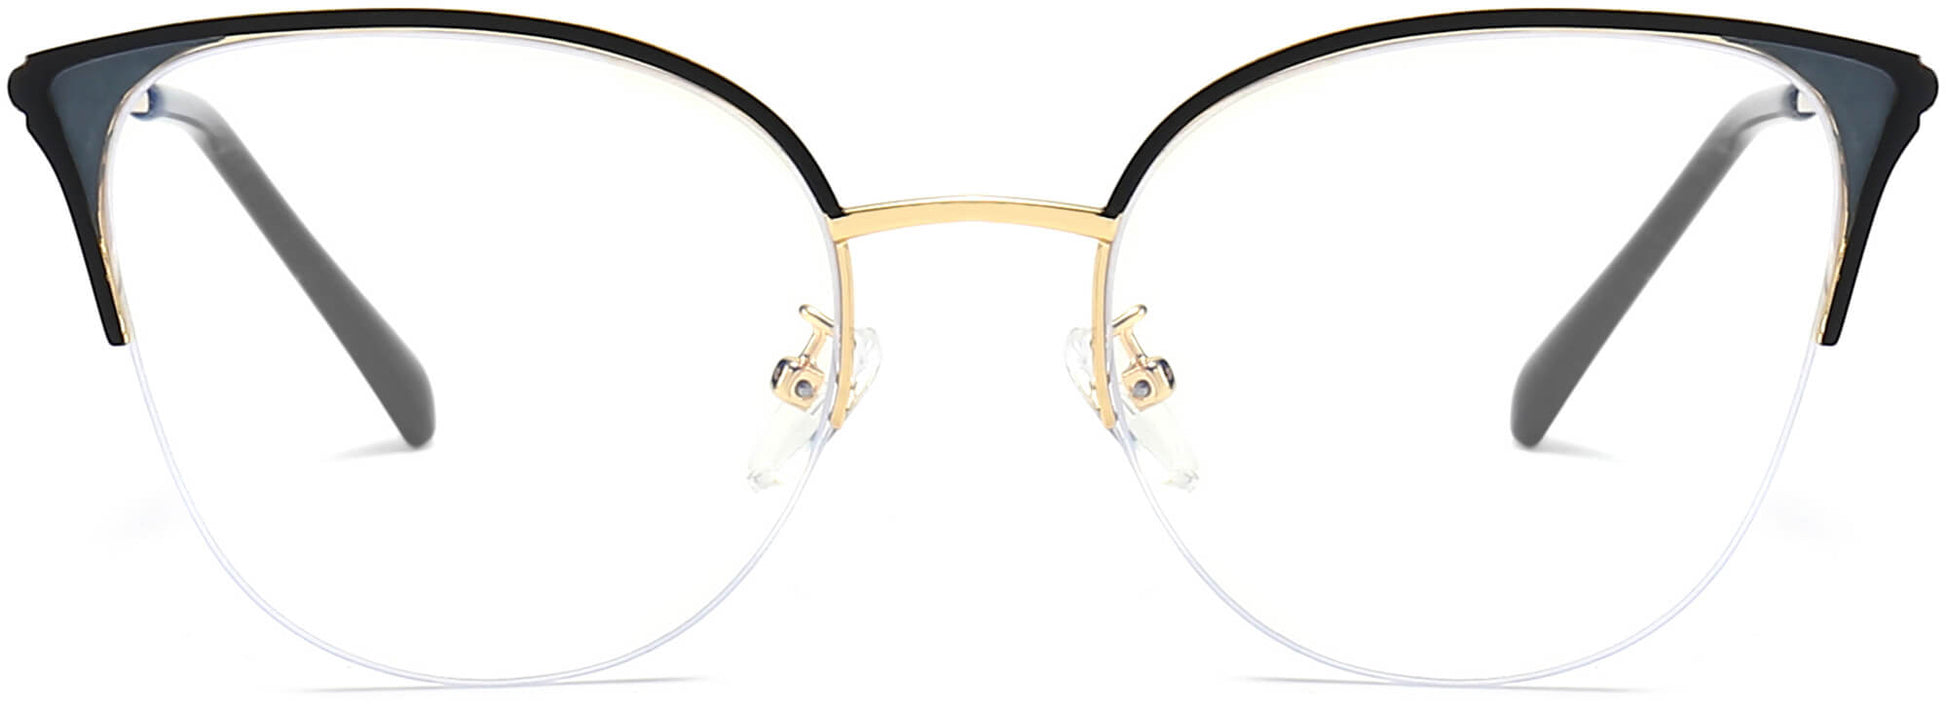 Nia Cateye Black Eyeglasses from ANRRI, front view